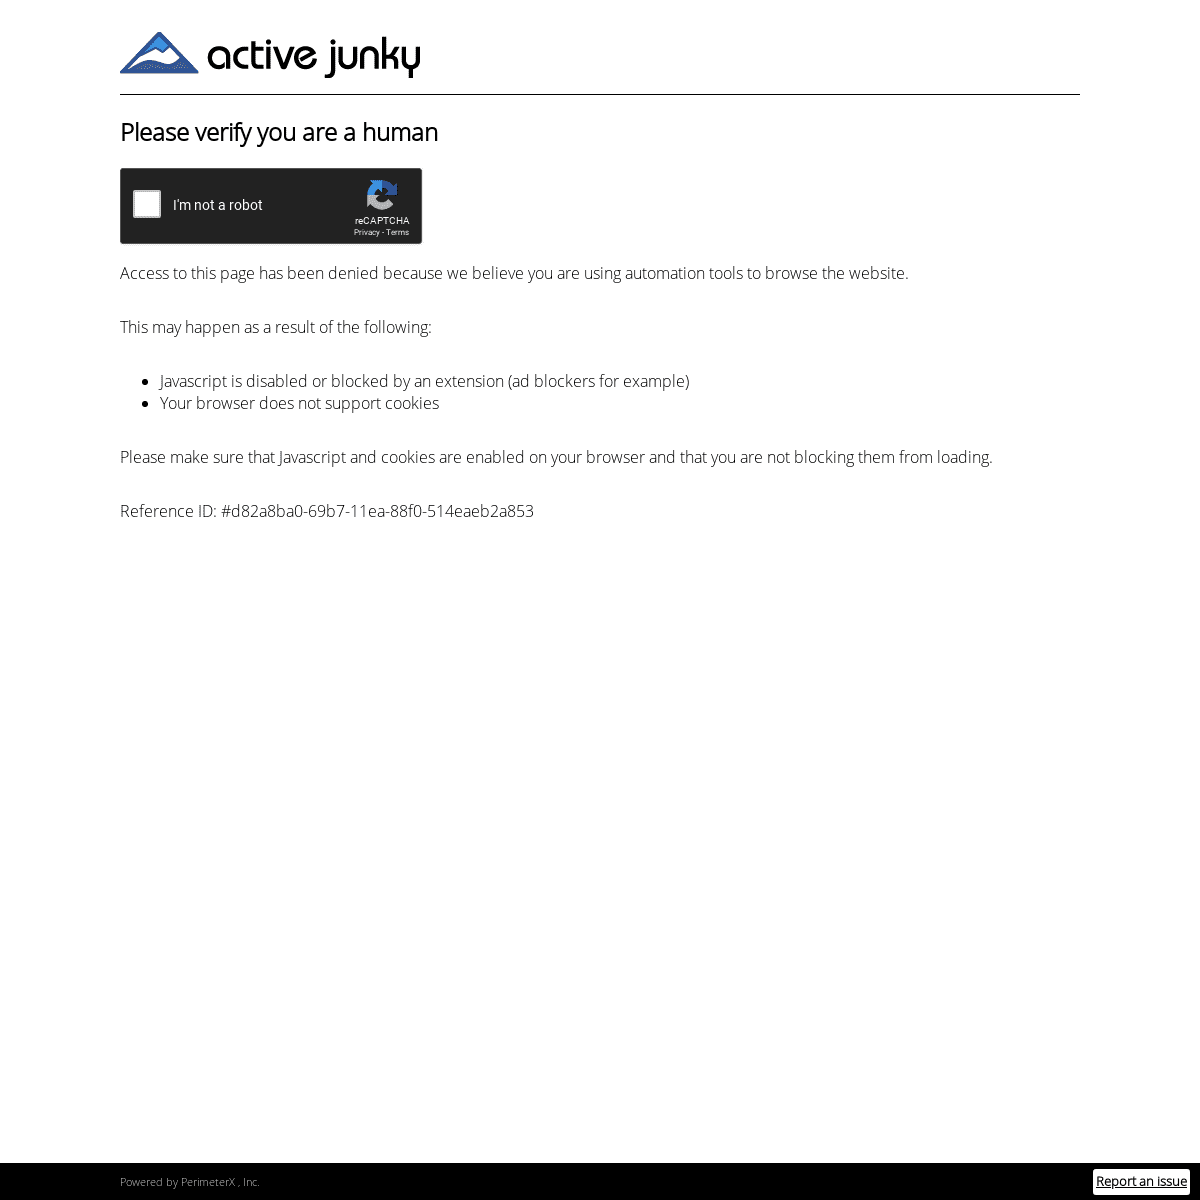 A complete backup of activejunky.com